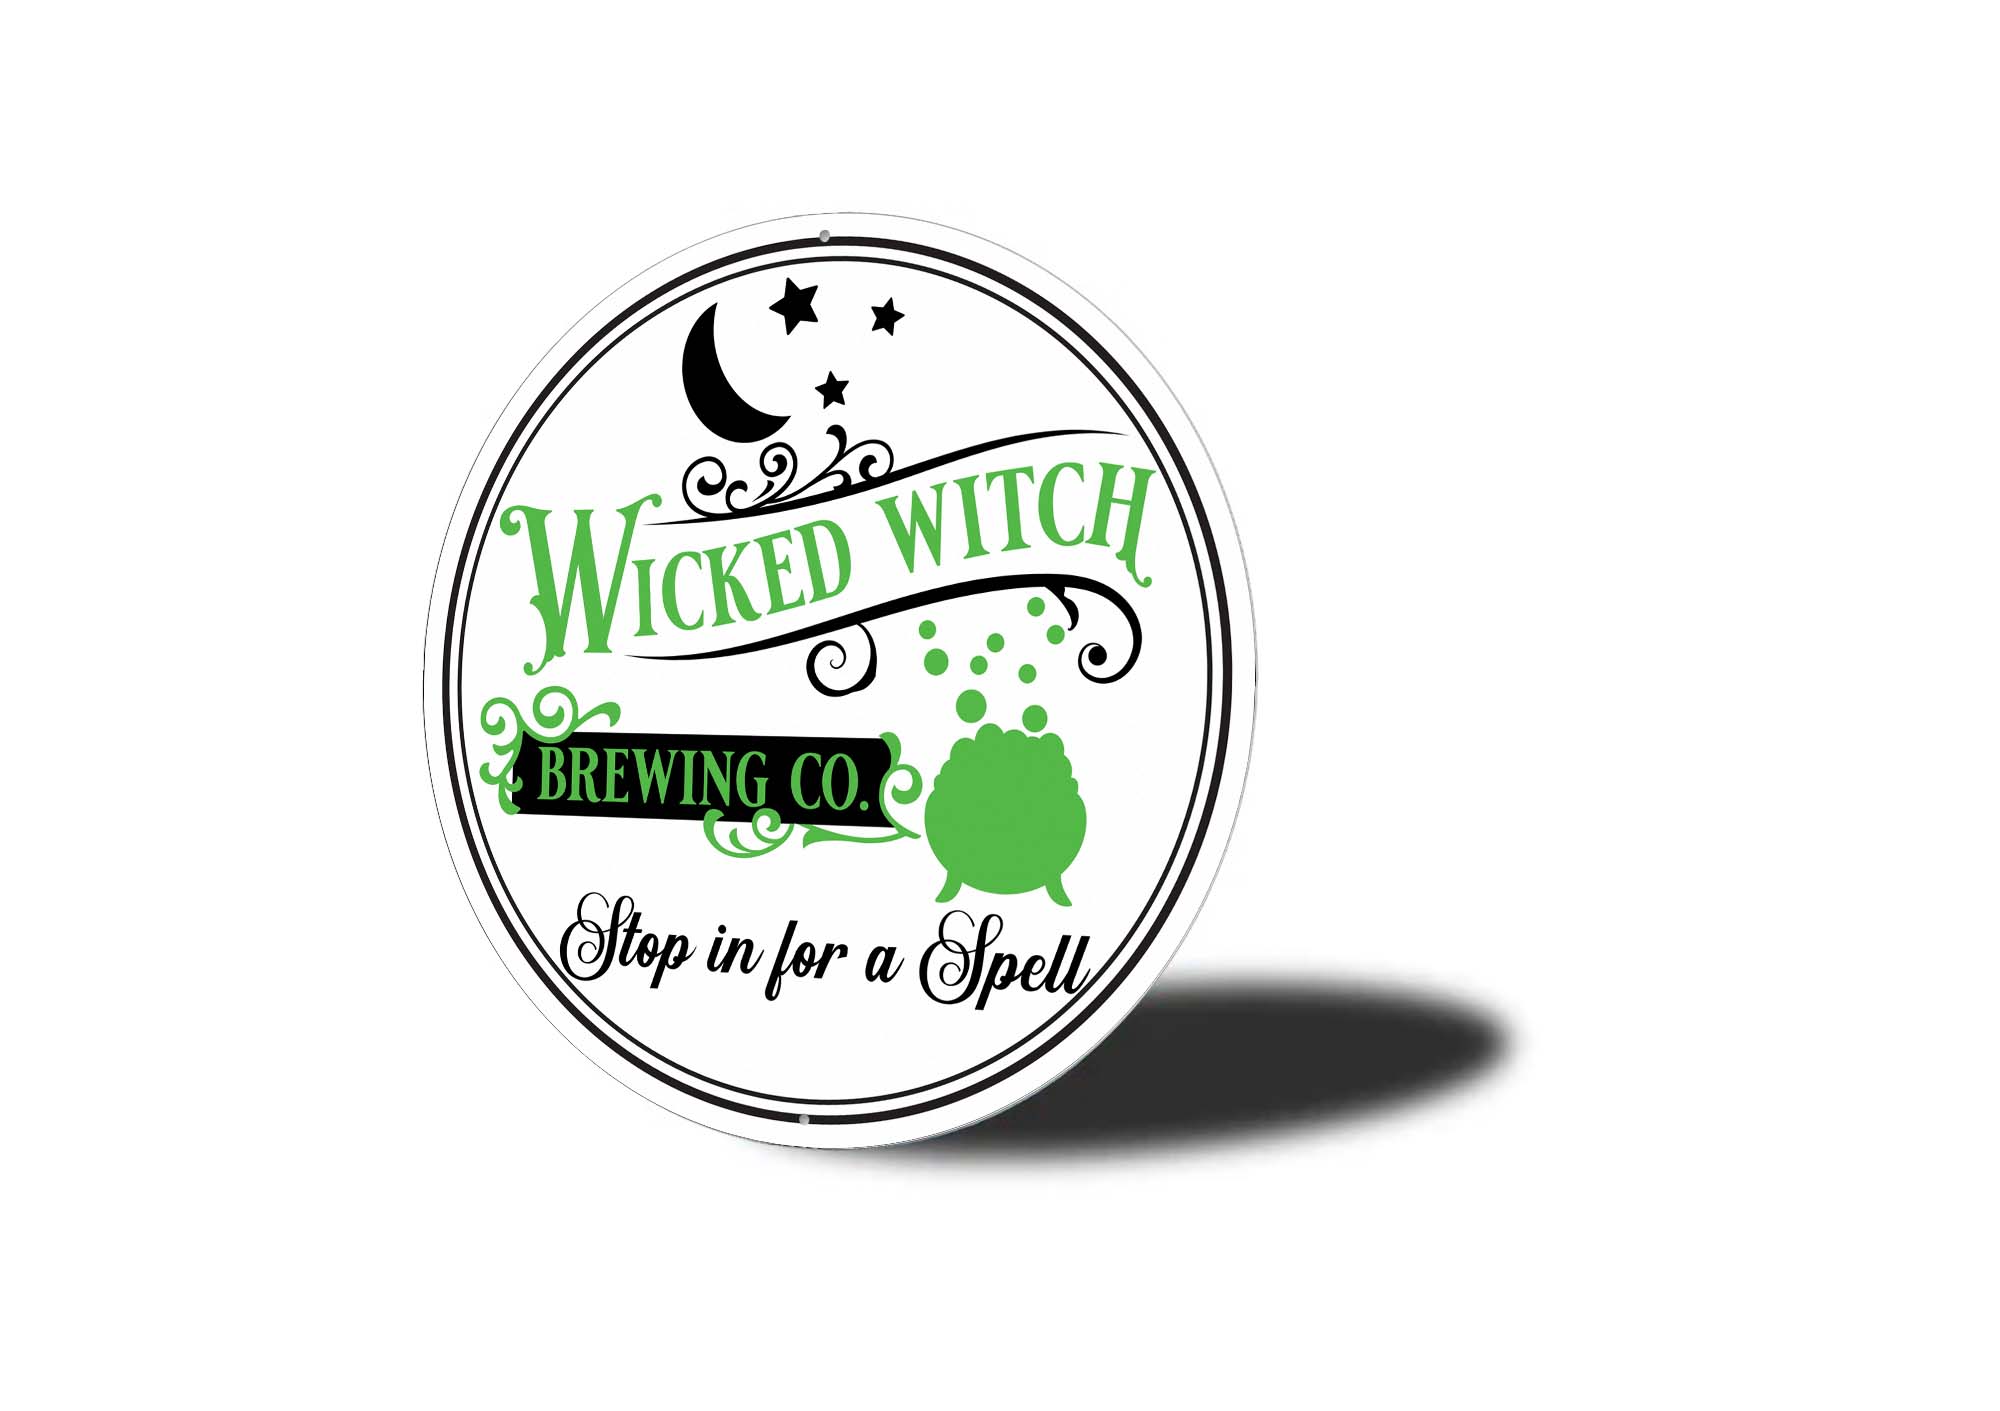 Wicked Witch Brewing Co Halloween Sign